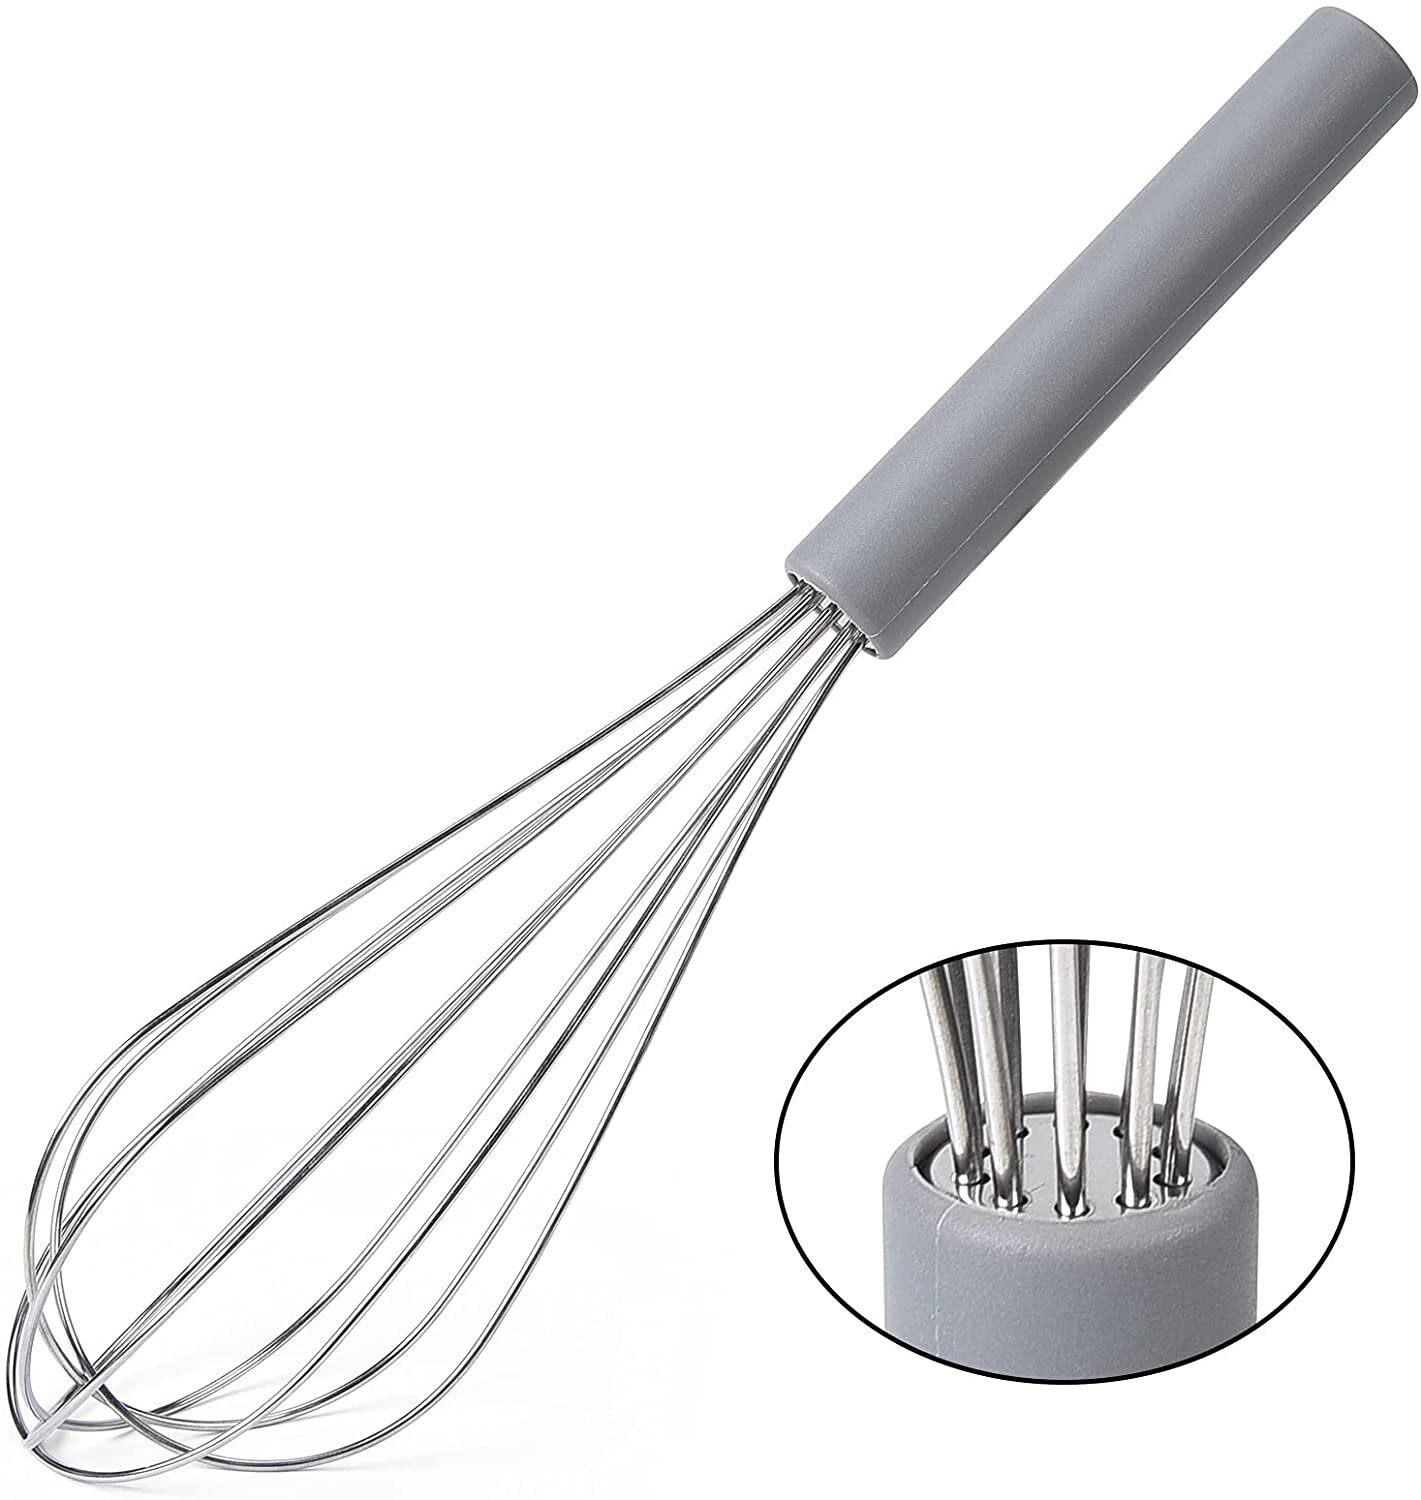 Stainless Steel Press Hand Rotating Whisk Wire Mixer Egg Beater Stiring Tool US